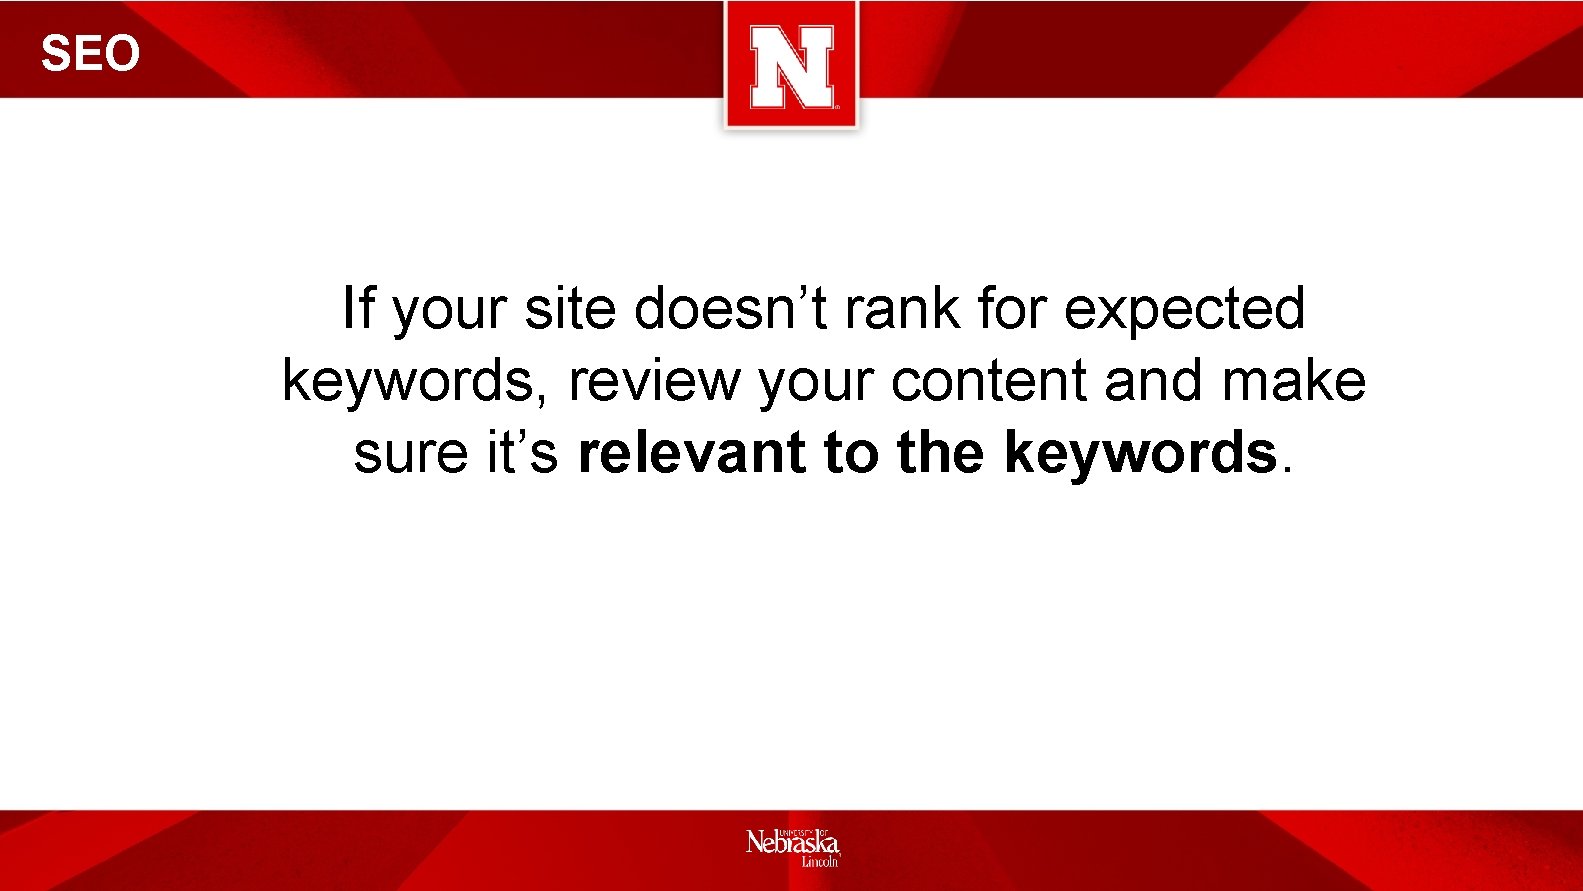 SEO If your site doesn’t rank for expected keywords, review your content and make